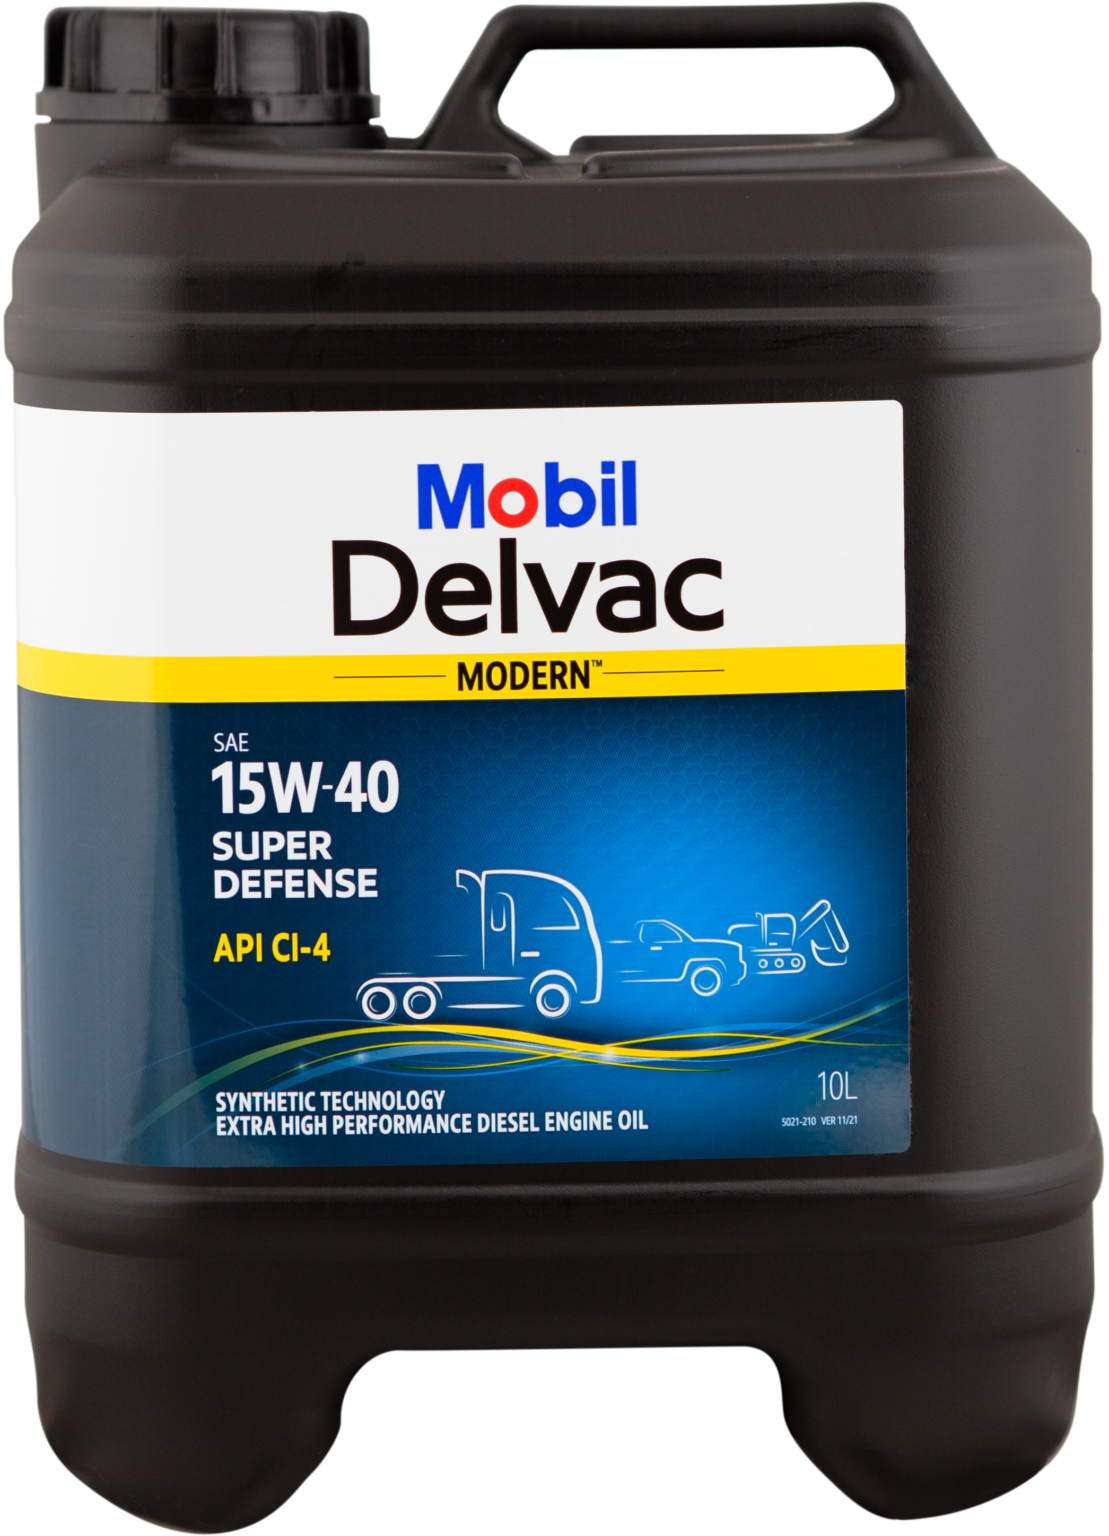 Is Mobil Delvac Good Oil